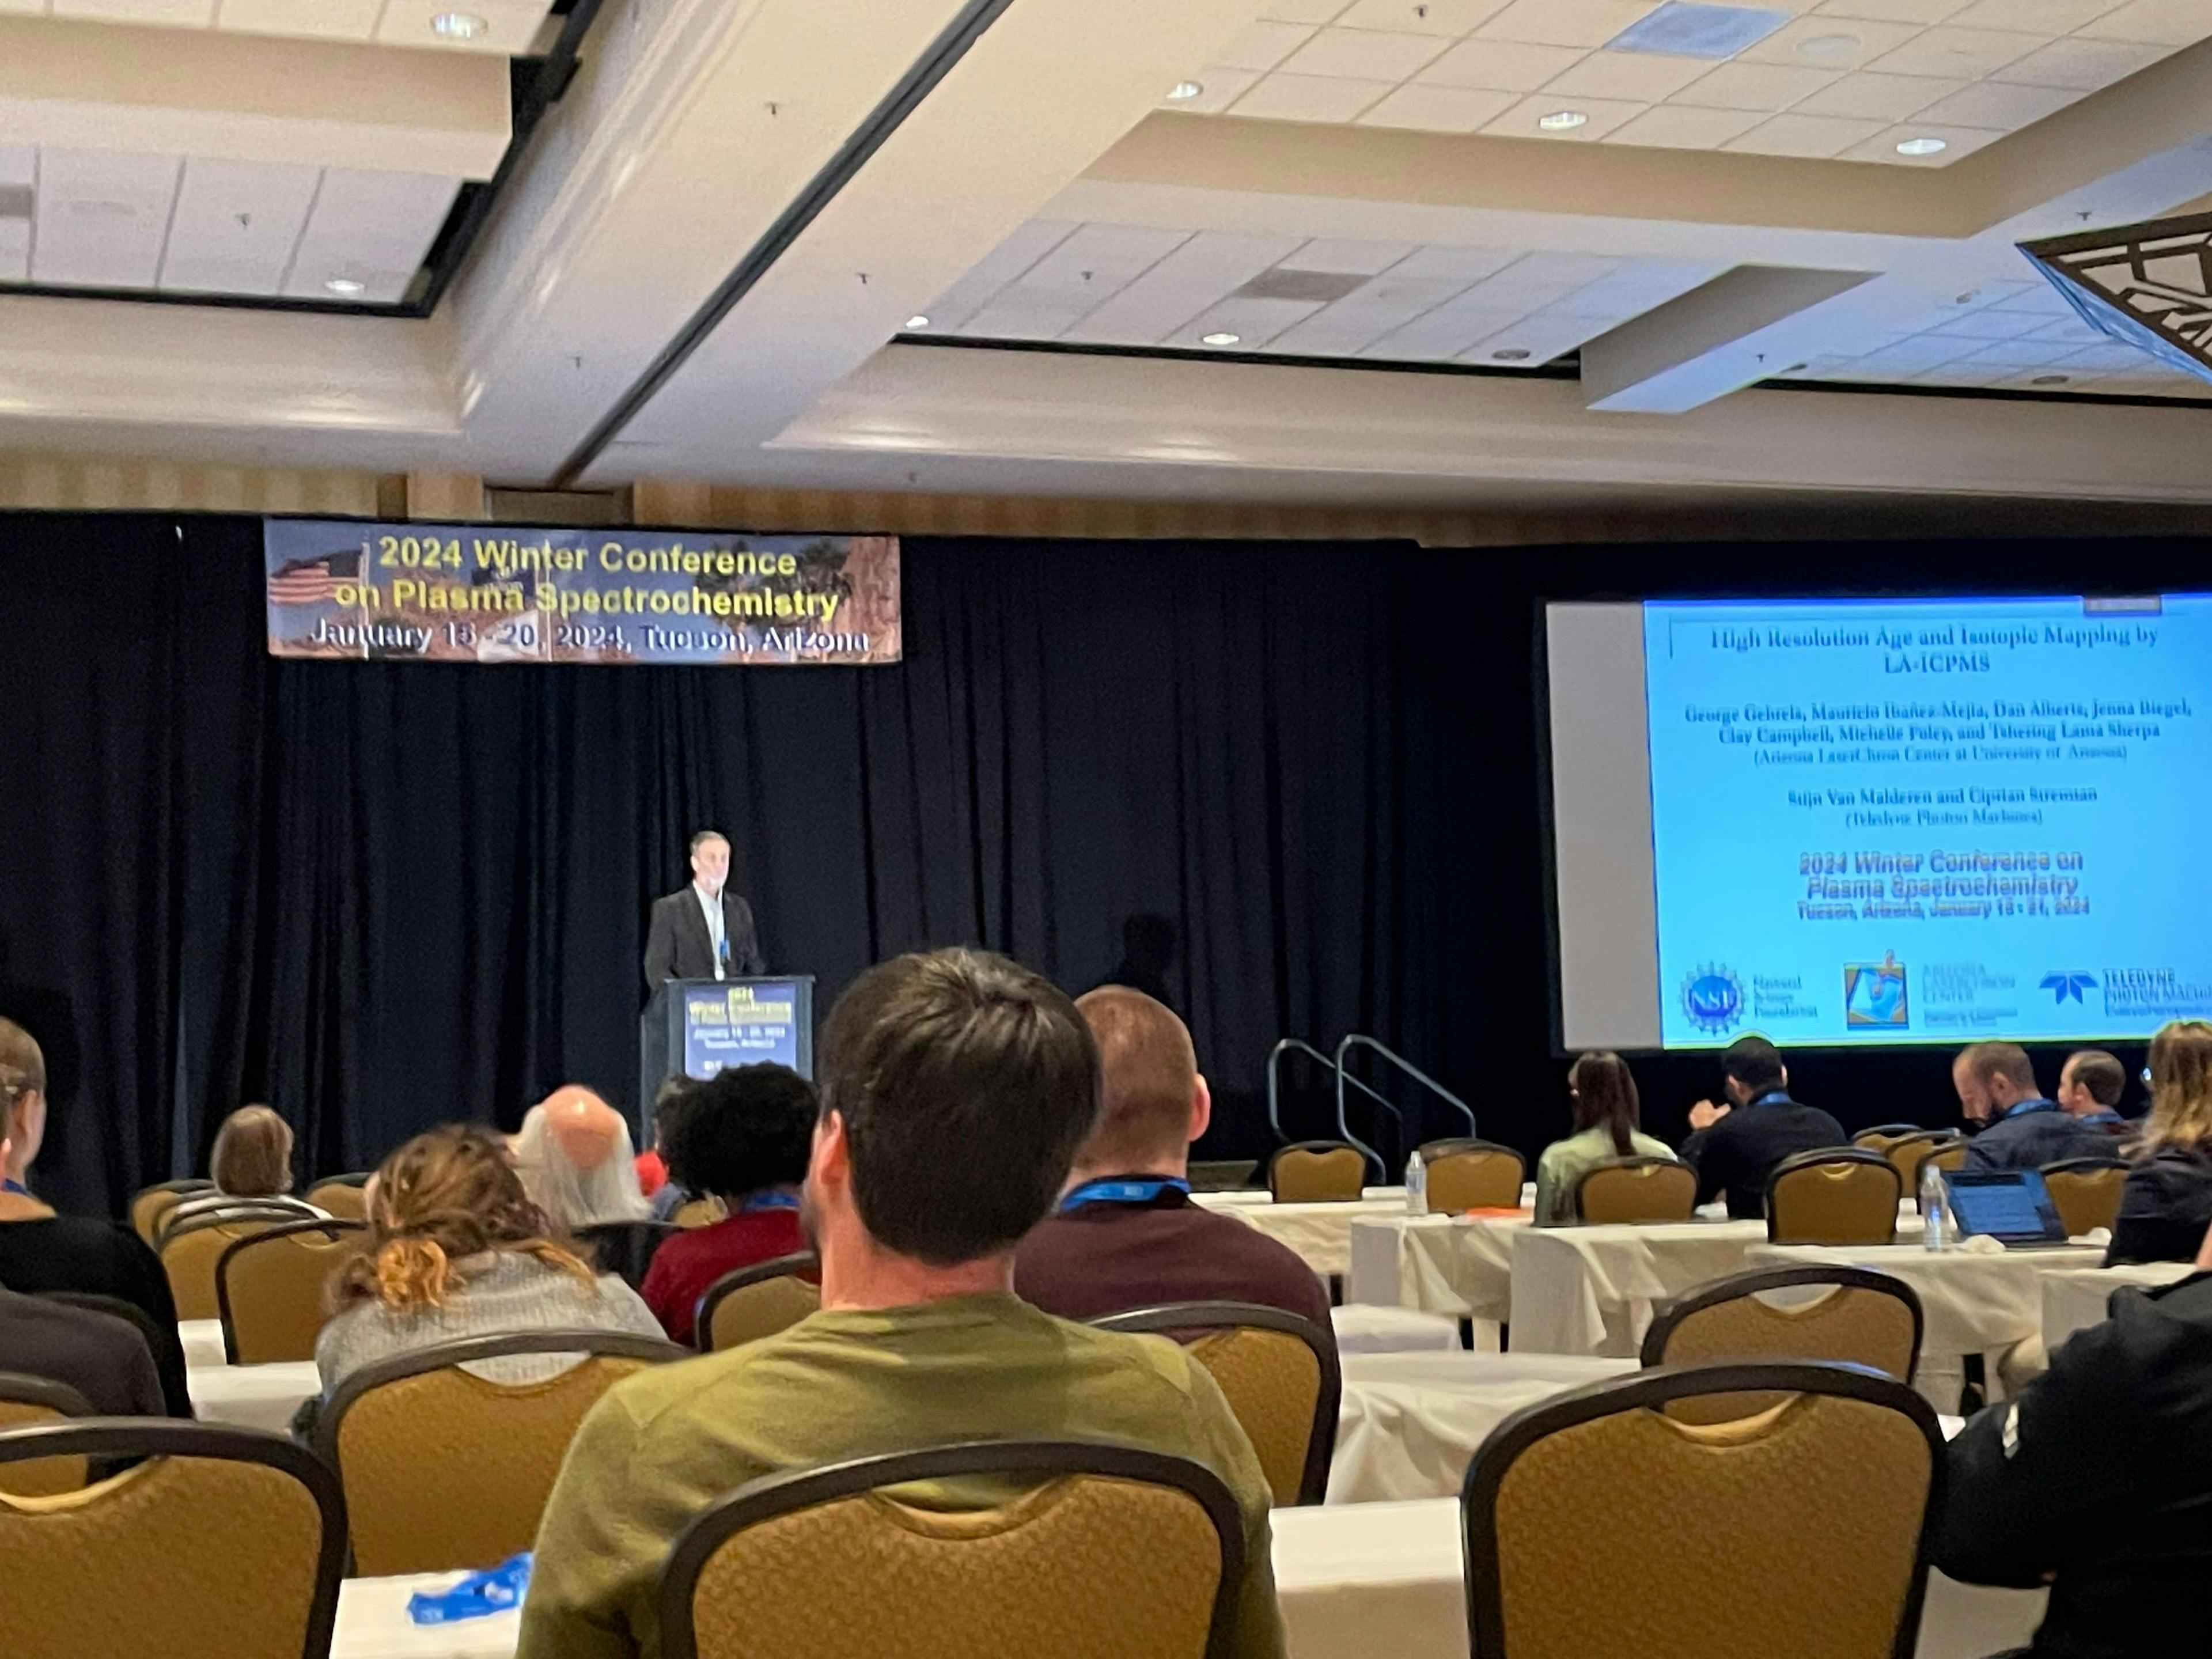 George Gehrels of the University of Arizona delivers his talk on geochronology at the Winter Conference on Plasma Spectrochemistry. Photo Credit: © Will Wetzel